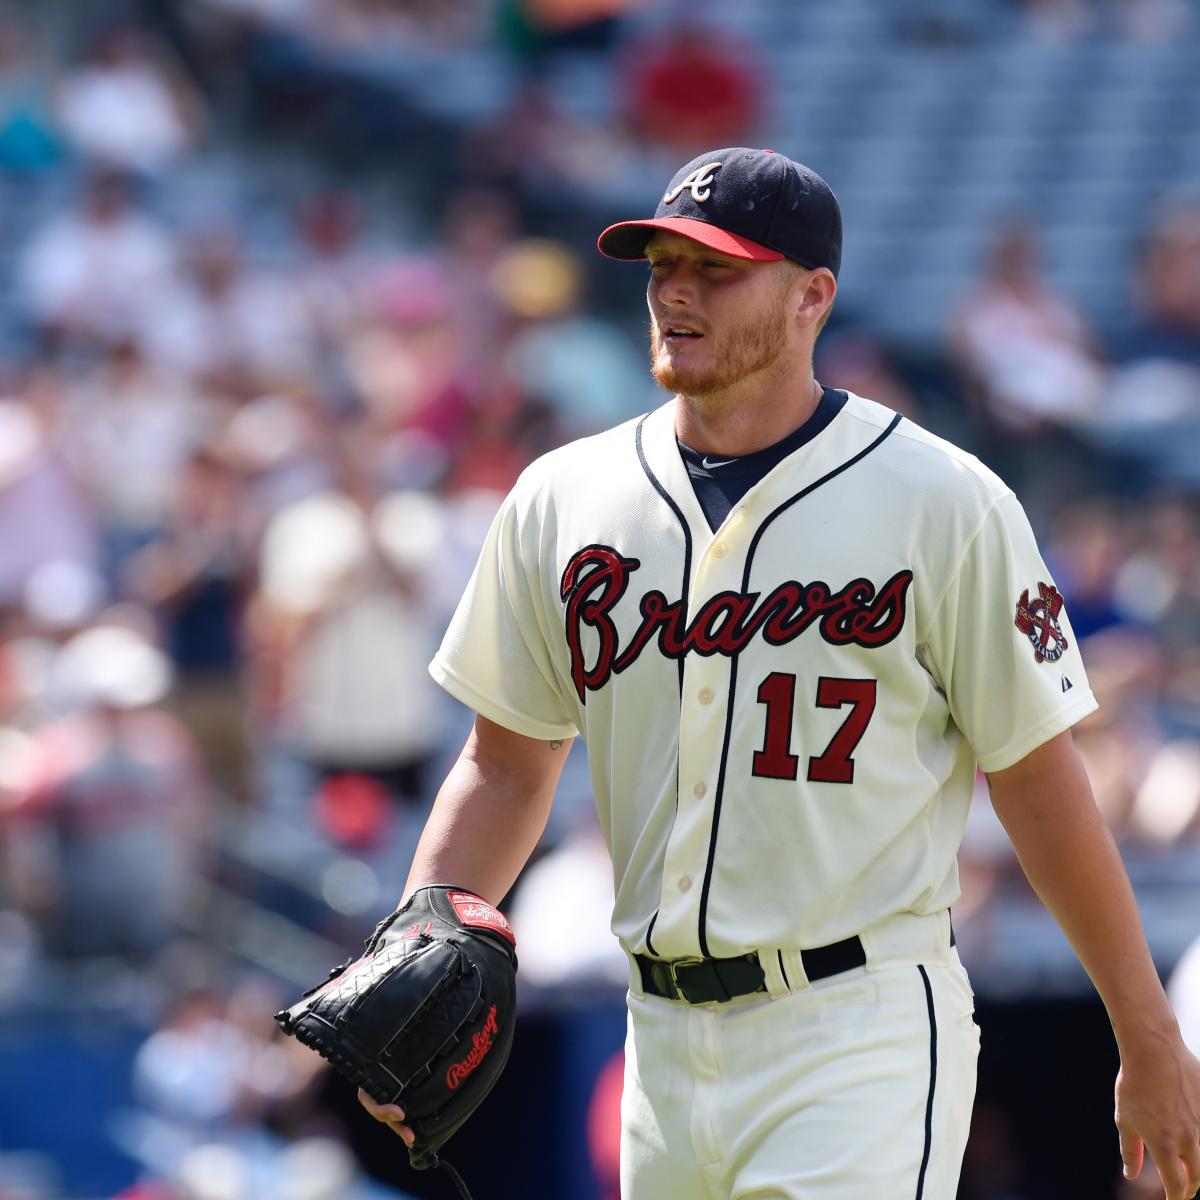 ESPN suggests this blockbuster trade for the Braves